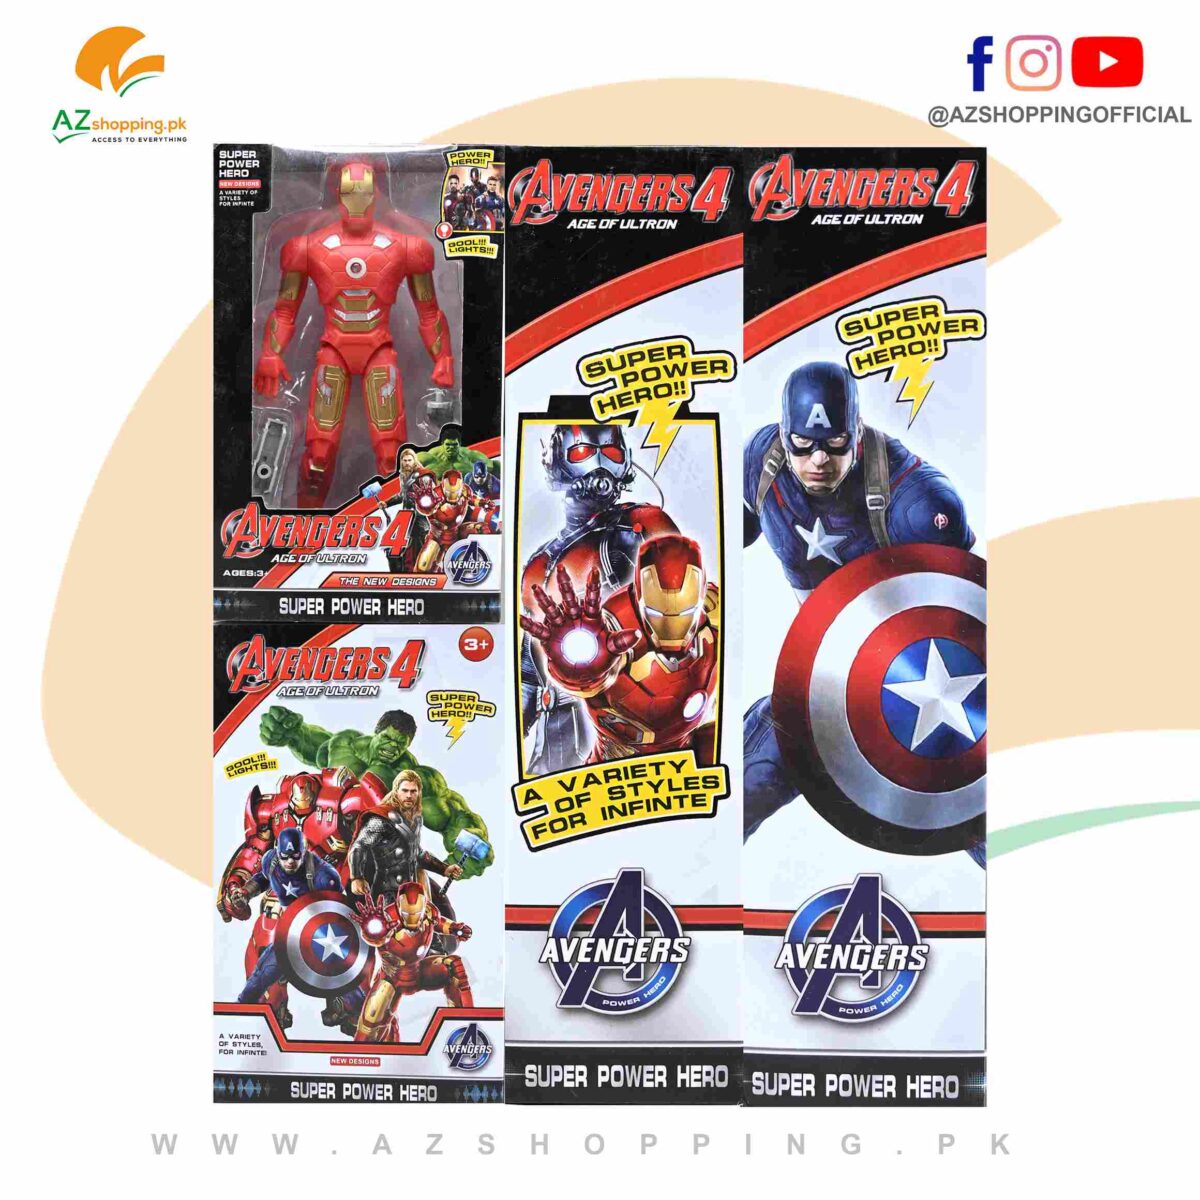 Avengers 4 Age of Ultron – Super Power Hero – Pack of 5 Action Figures (Ironman, Thor, Hulk, Captain America, Antman)